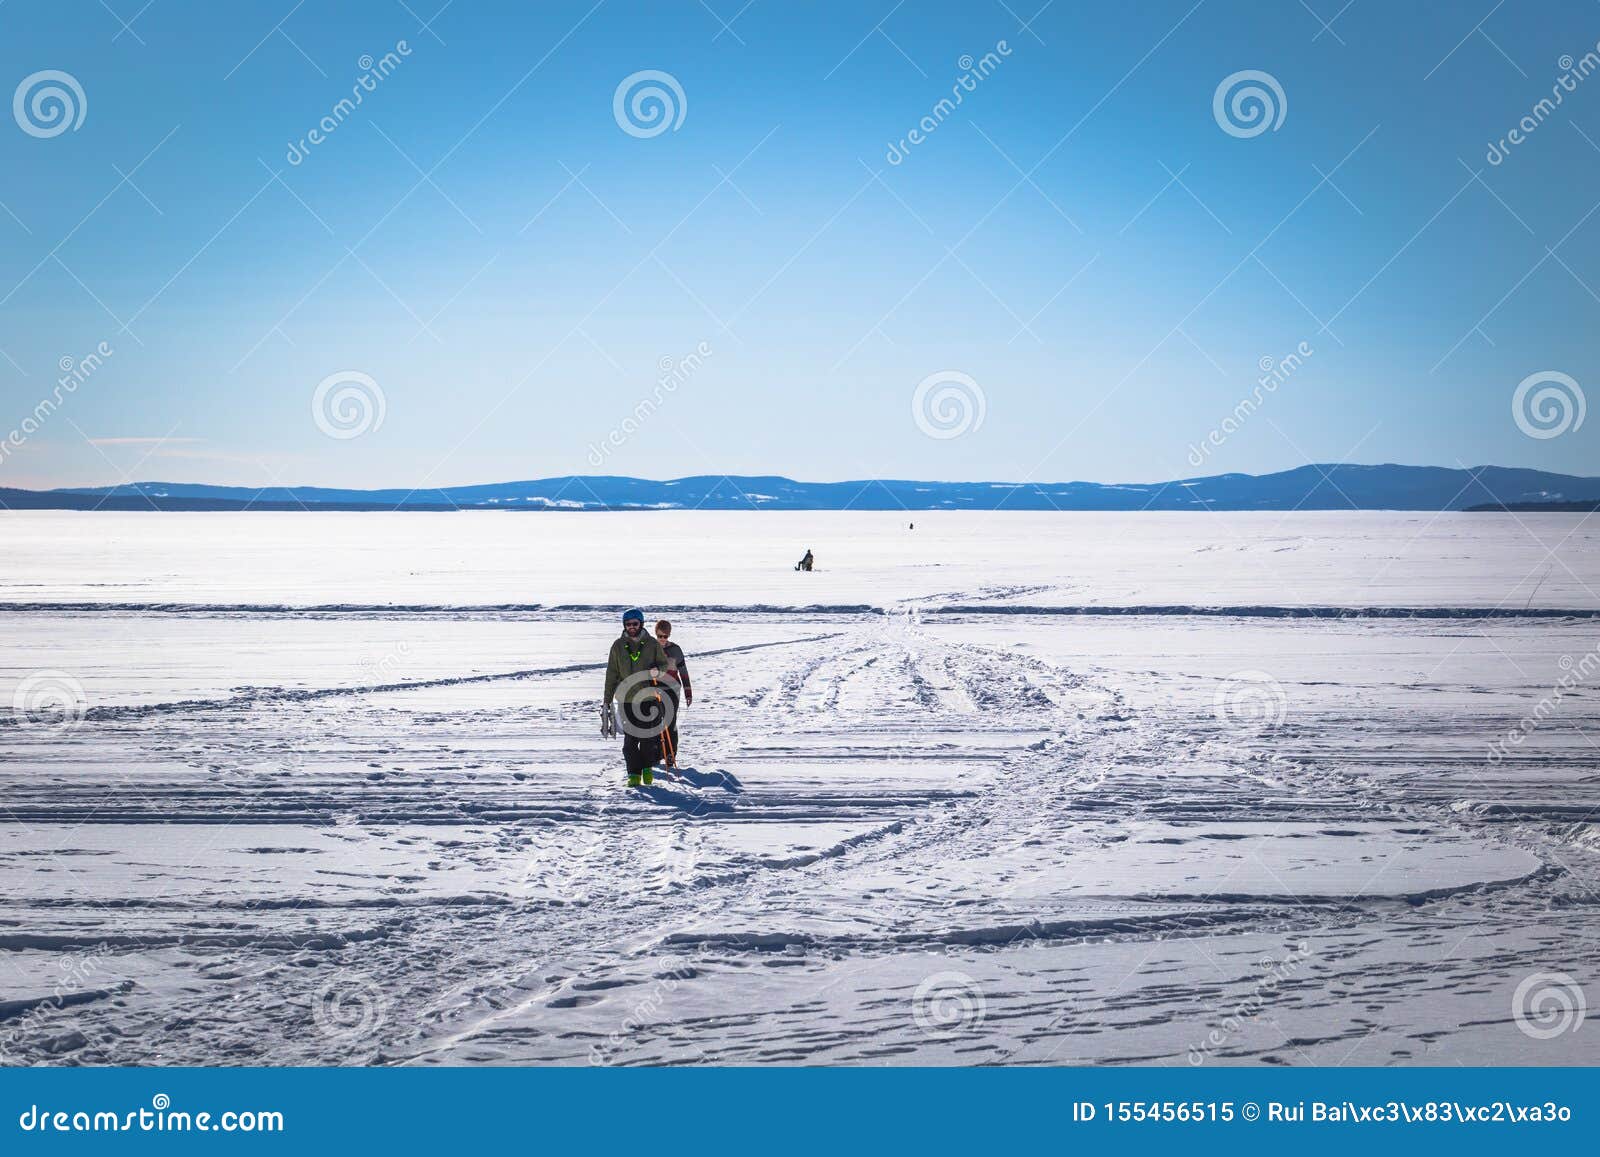 rattvik - march 30, 2018: the frozen lake siljan by the town of rattvik, dalarna, sweden